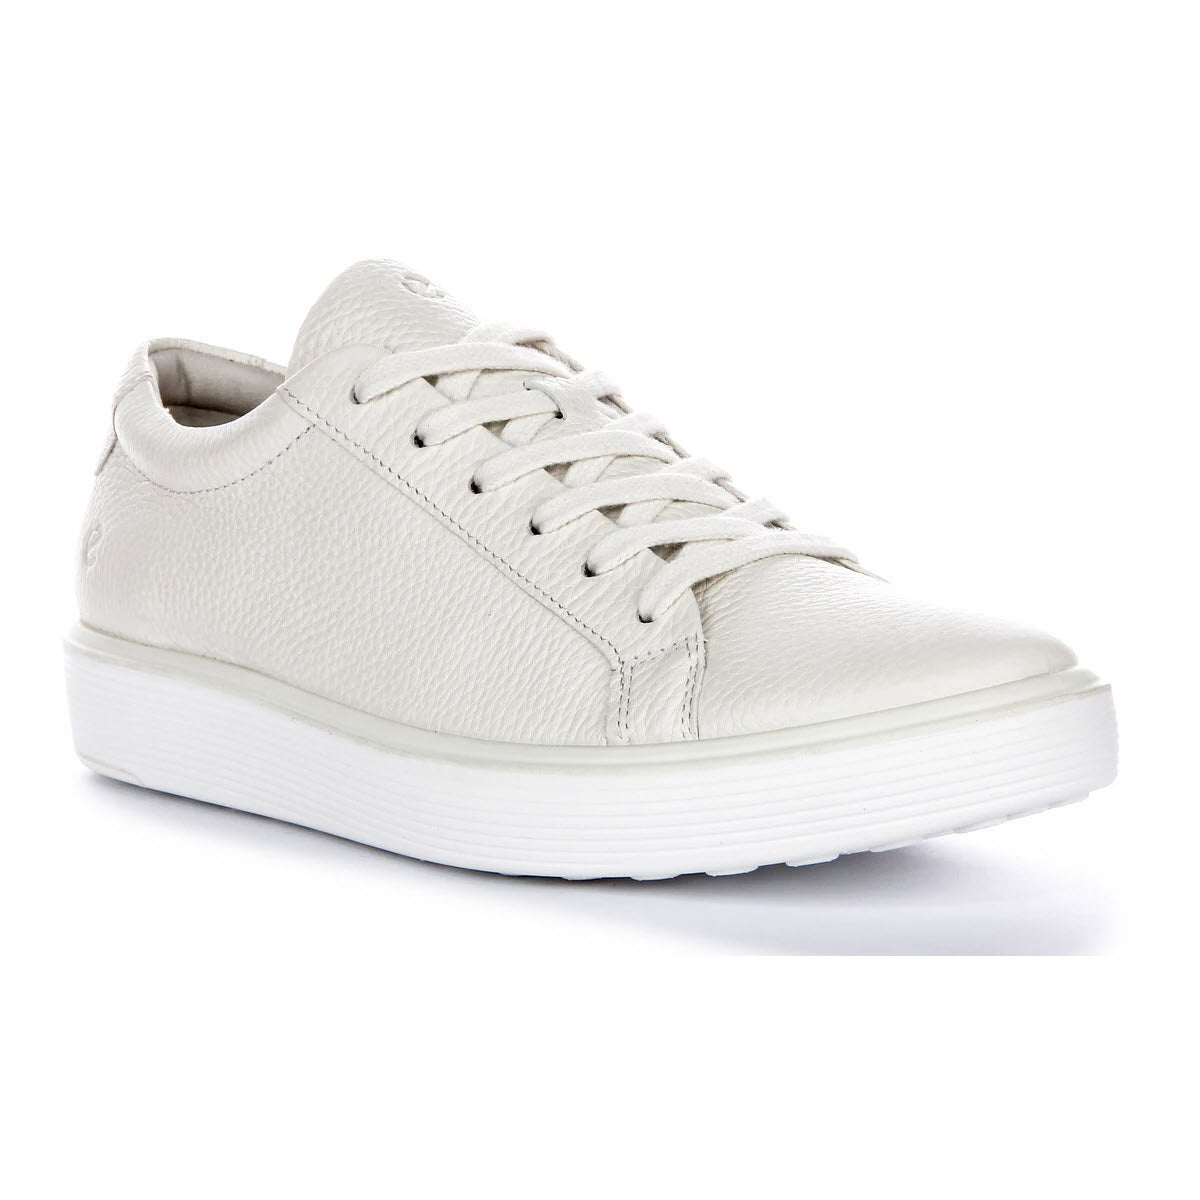 ECCO SOFT 60 WHITE - WOMENS sneaker with laces and a thick, padded footbed, displayed on a plain white background.